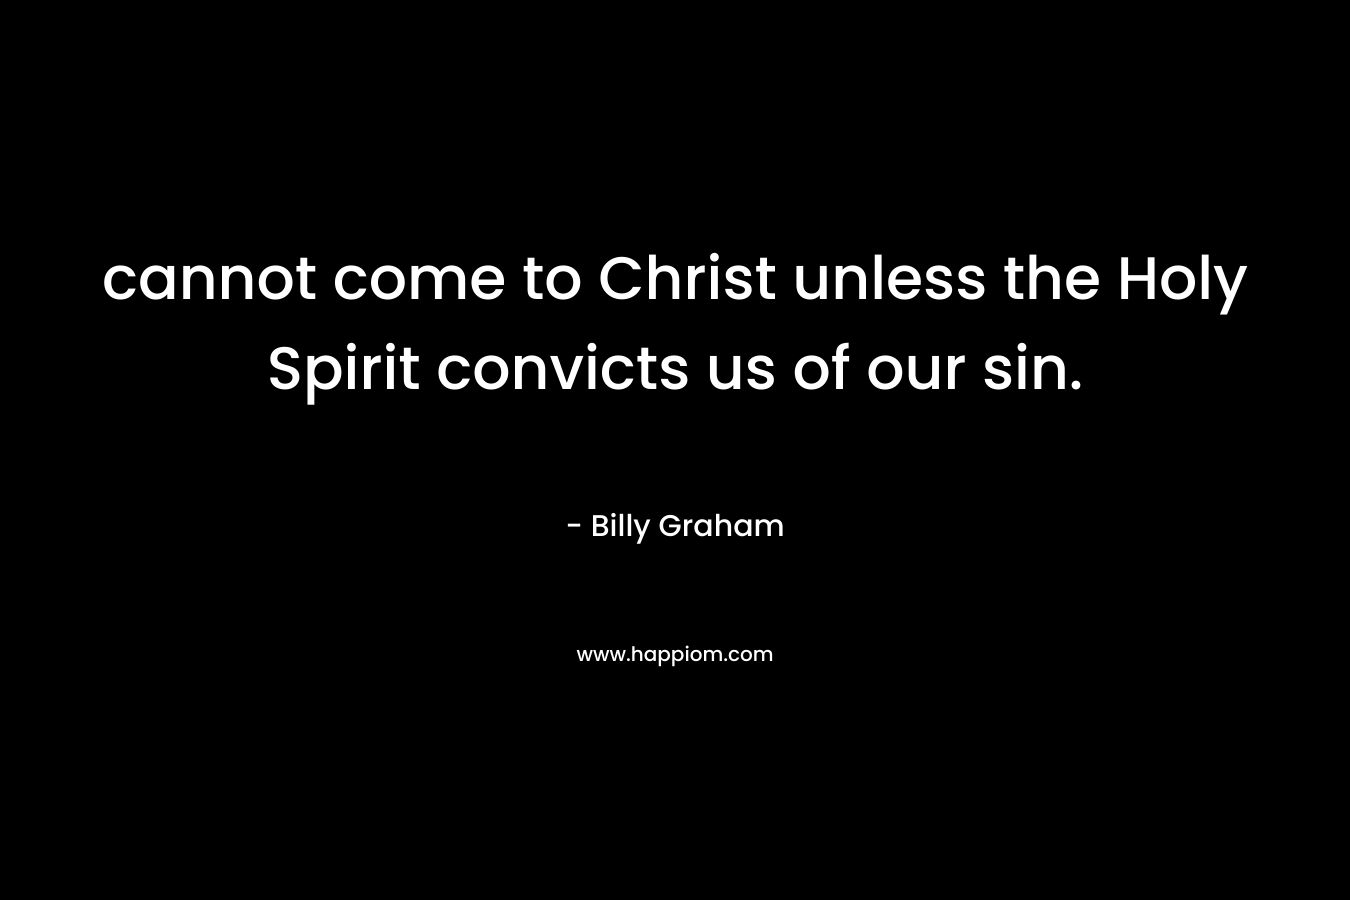 cannot come to Christ unless the Holy Spirit convicts us of our sin.